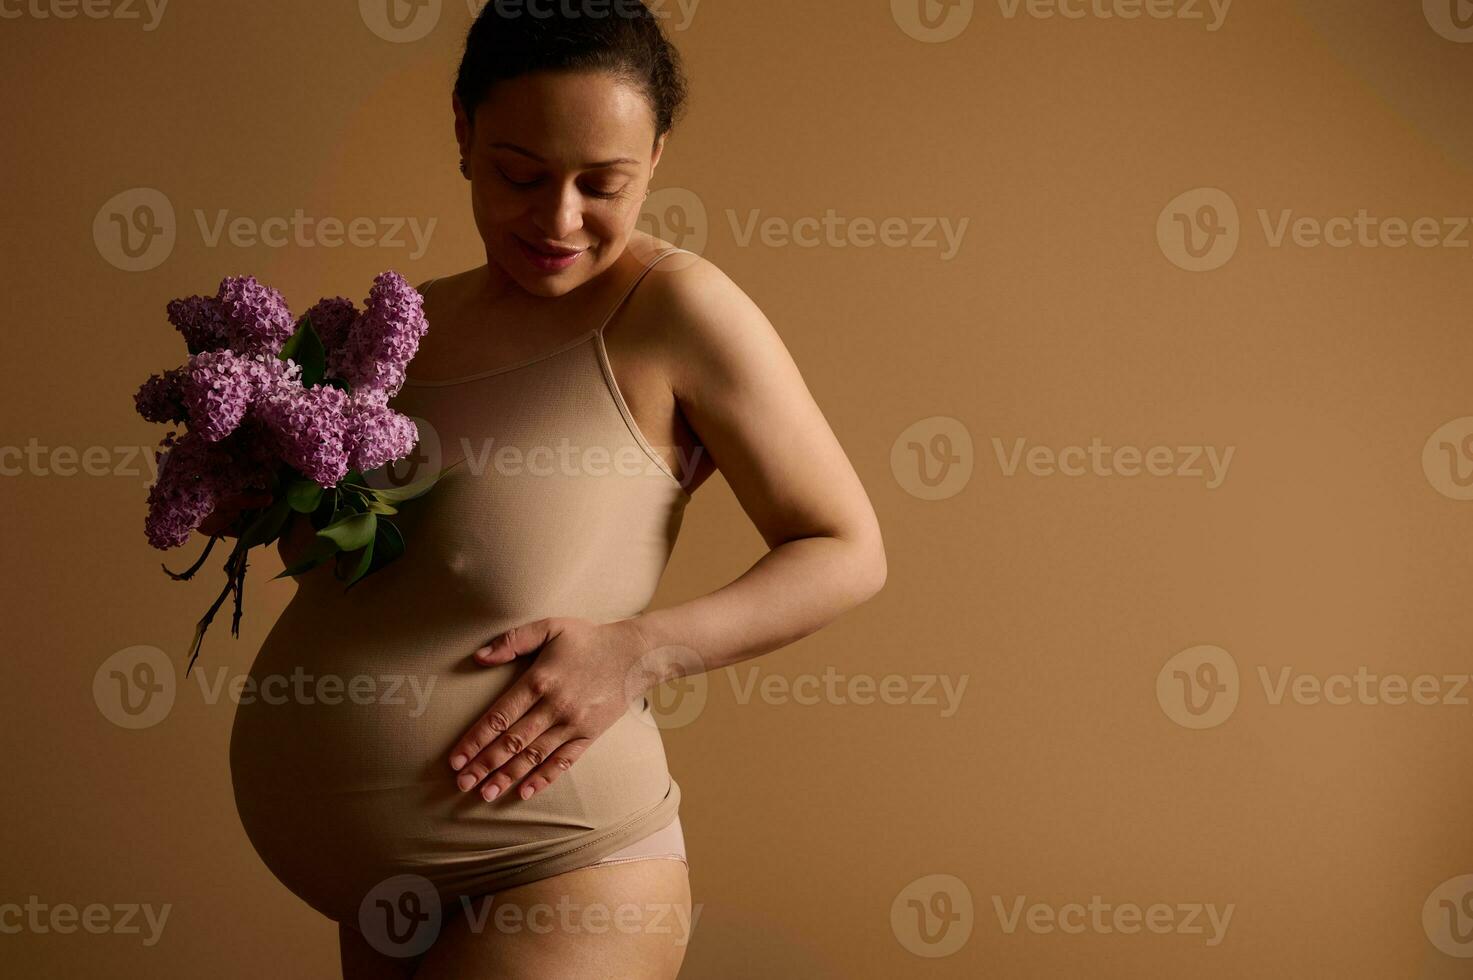 Attractive pregnant woman smiling, touching her belly, posing with a bunch of blooming lilacs, dressed in beige lingerie photo